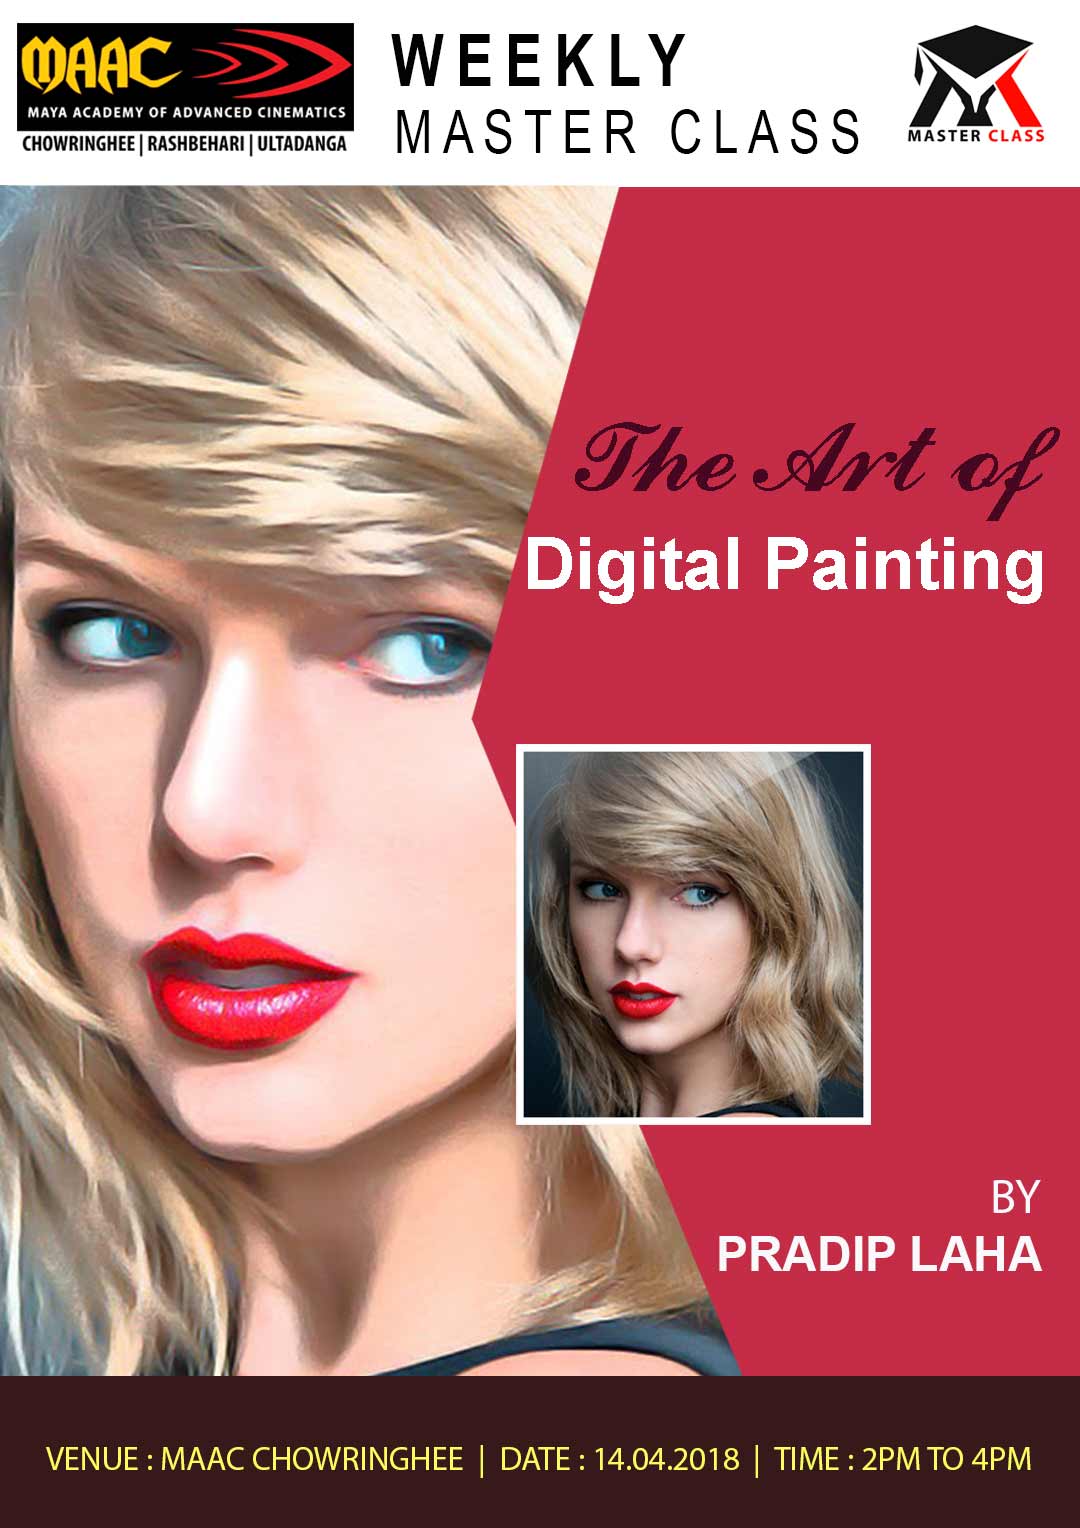 Weekly Master Class on The Art Of Digital Painting